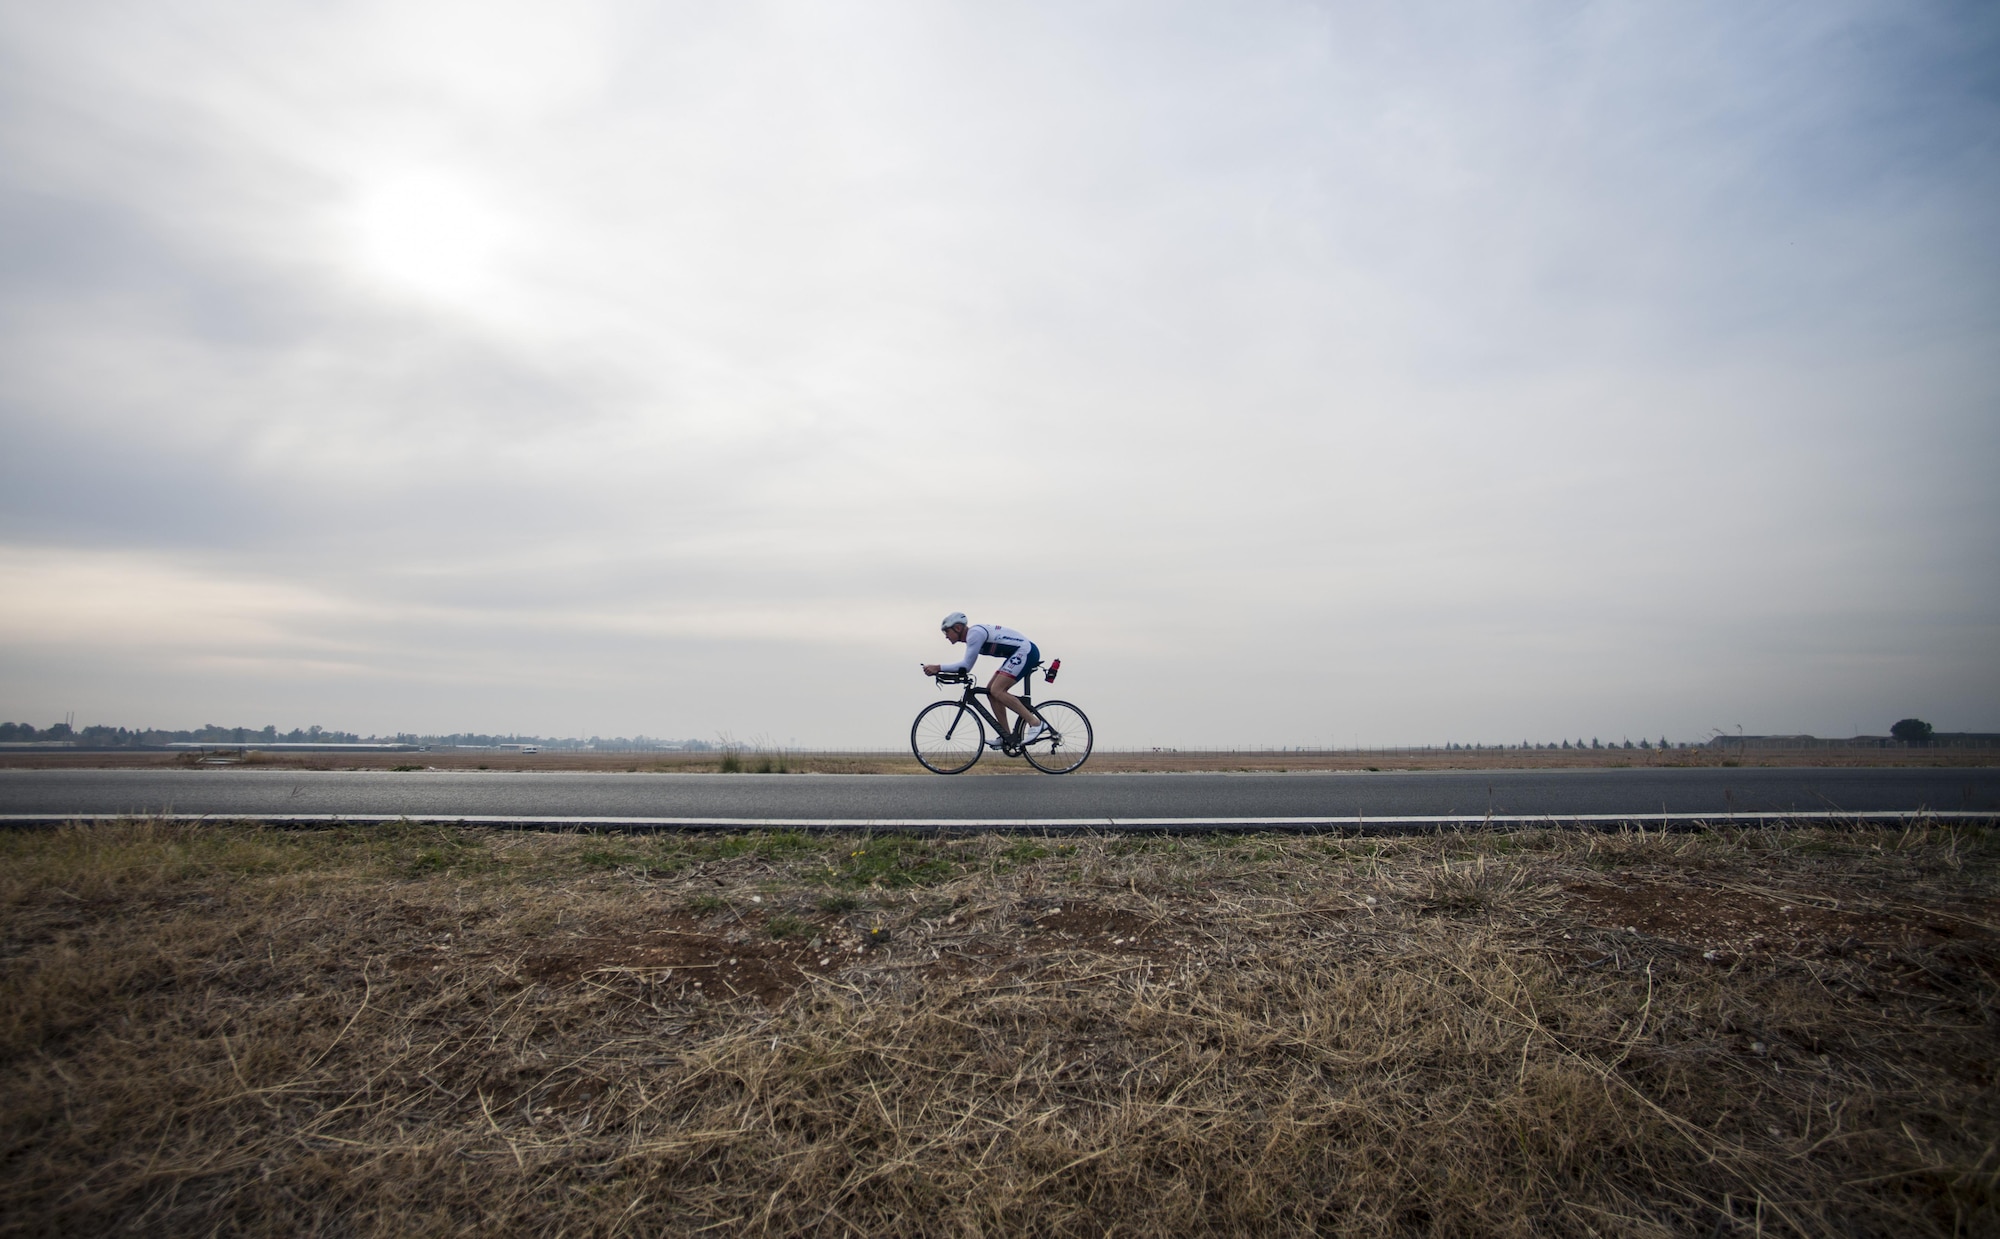 Senior Master Sgt. Jason Chiasson, the 39th Communications Squadron production superintendent, rides around the flightline at Incirlik Air Base, Turkey, Dec. 10, 2015. Chiasson rode 25 miles on his lunch break as part of his training program for the Air Force Cycling Team. (U.S. Air Force photo/Senior Airman Krystal Ardrey)